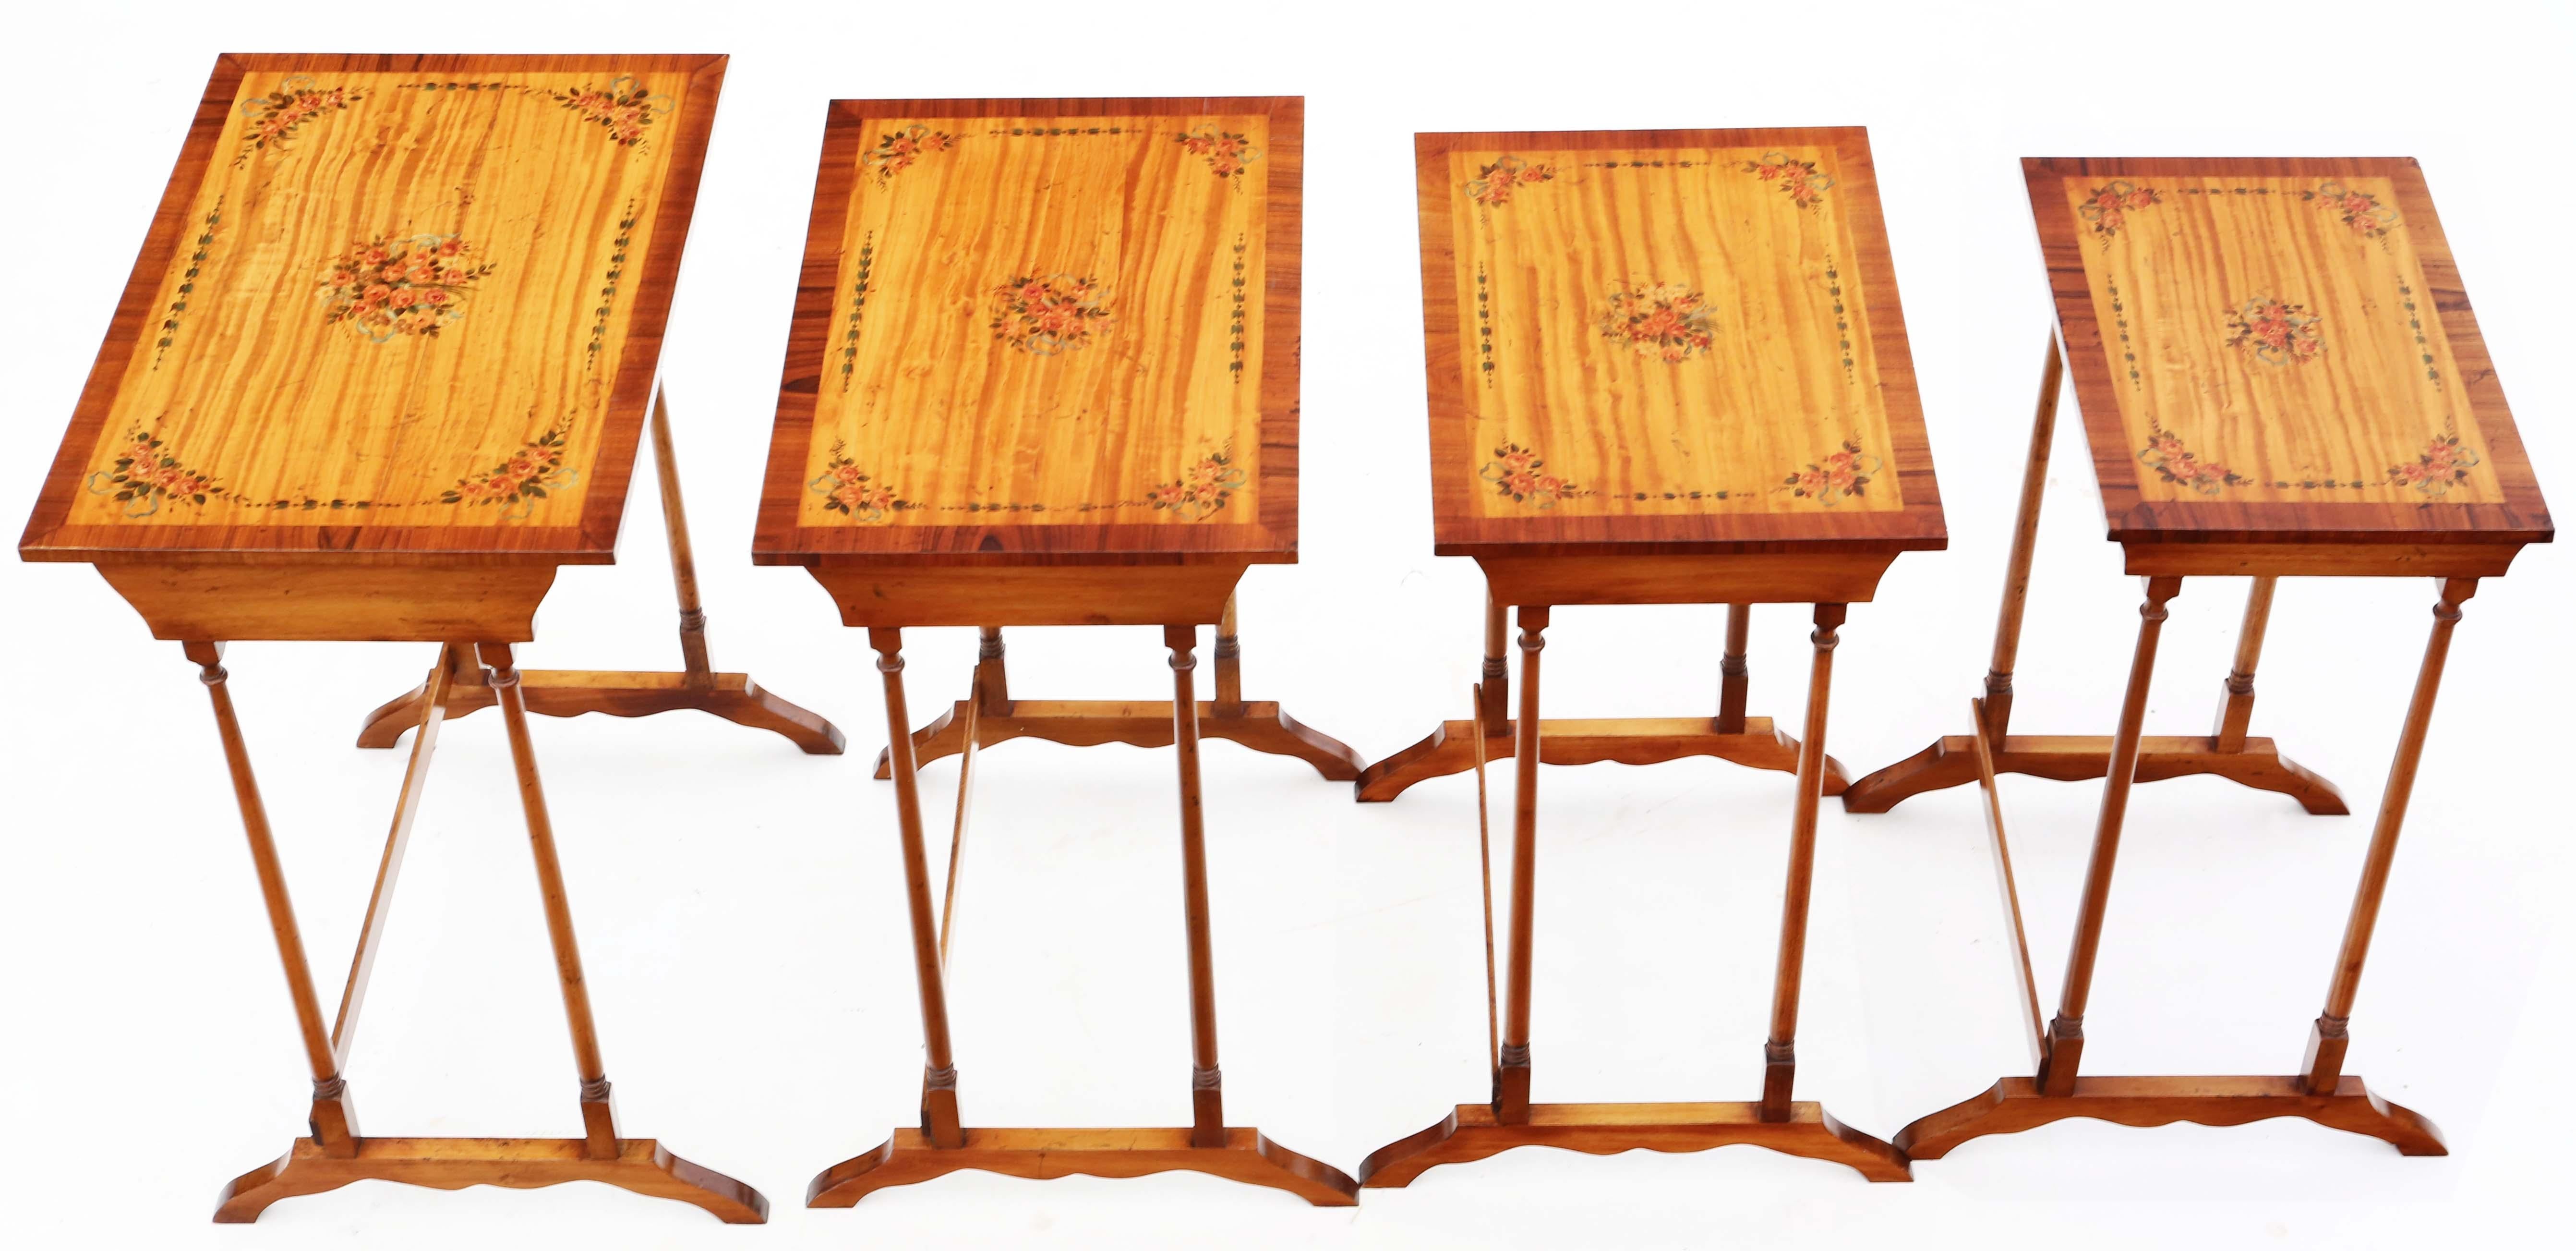 Mid-20th Century Antique fine quality retro vintage decorated satinwood nest of 4 Tables C1960 For Sale